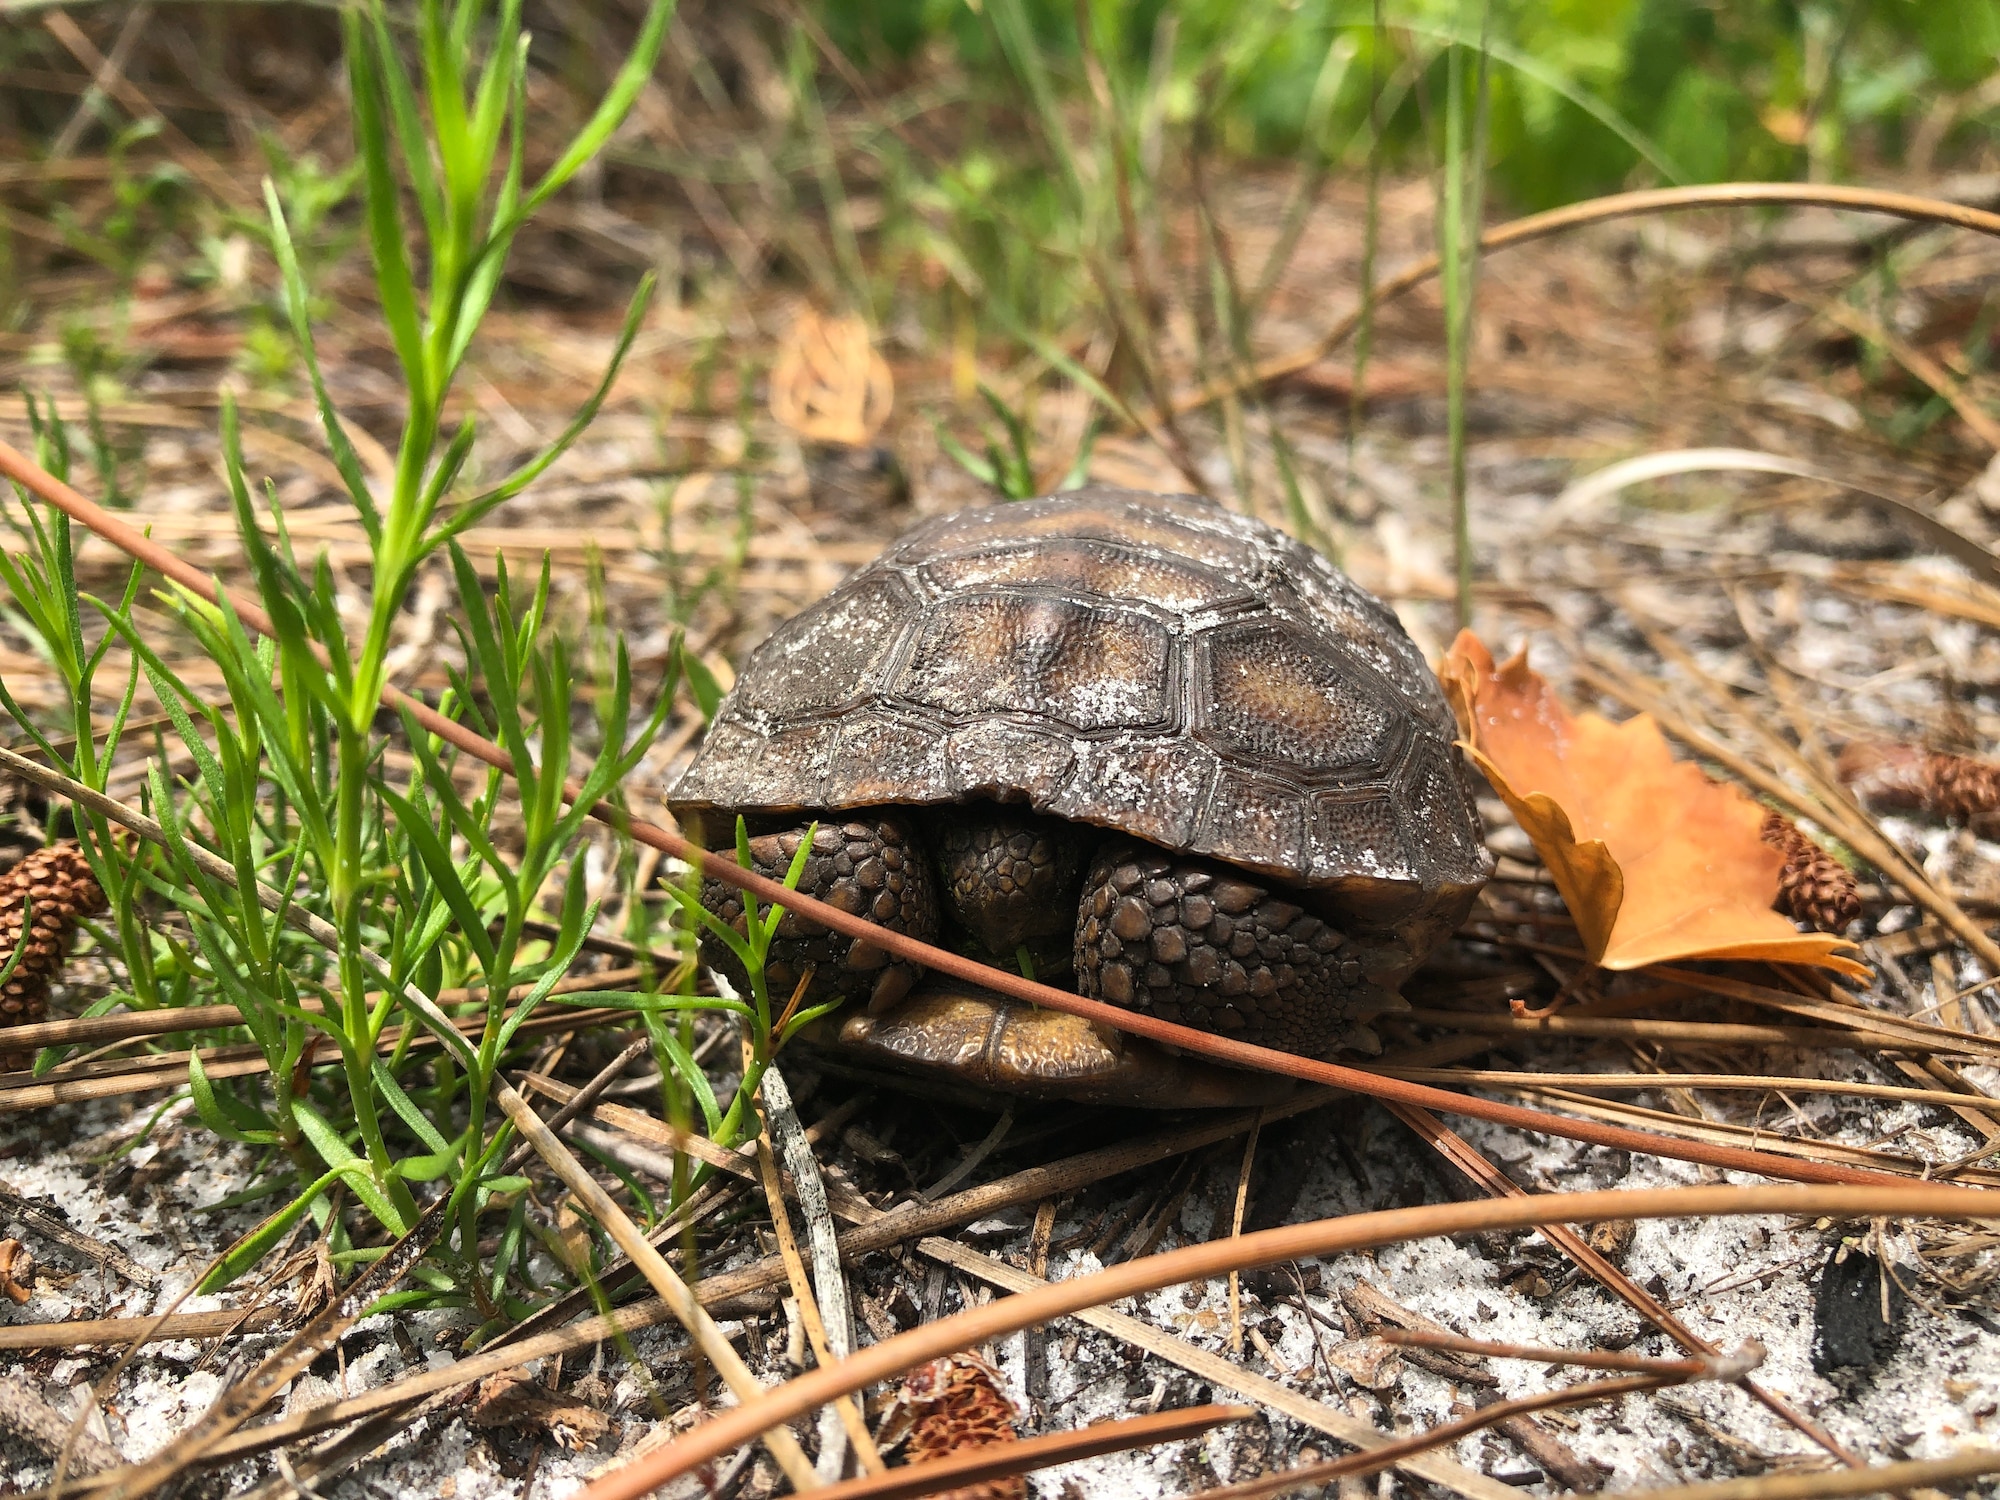 A juvenile gopher tortoise hides in its shell at MacDill Air Force Base, Florida, April 2019.